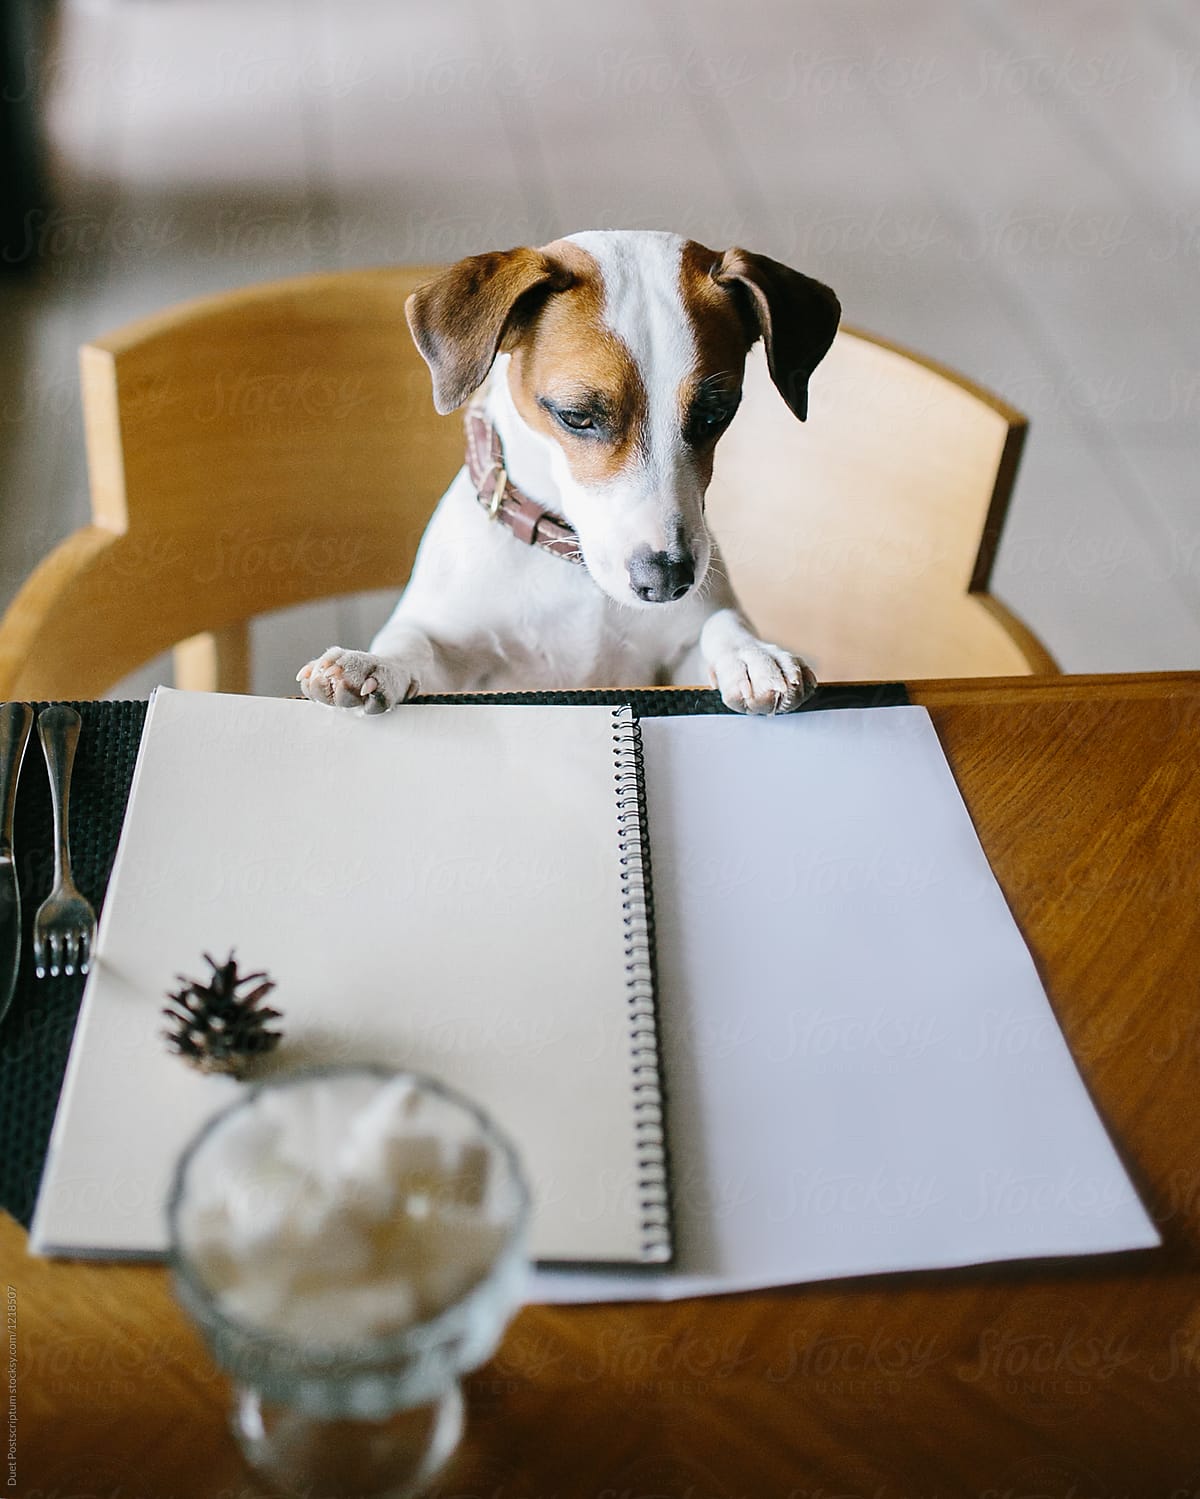 A dog sitting at the table